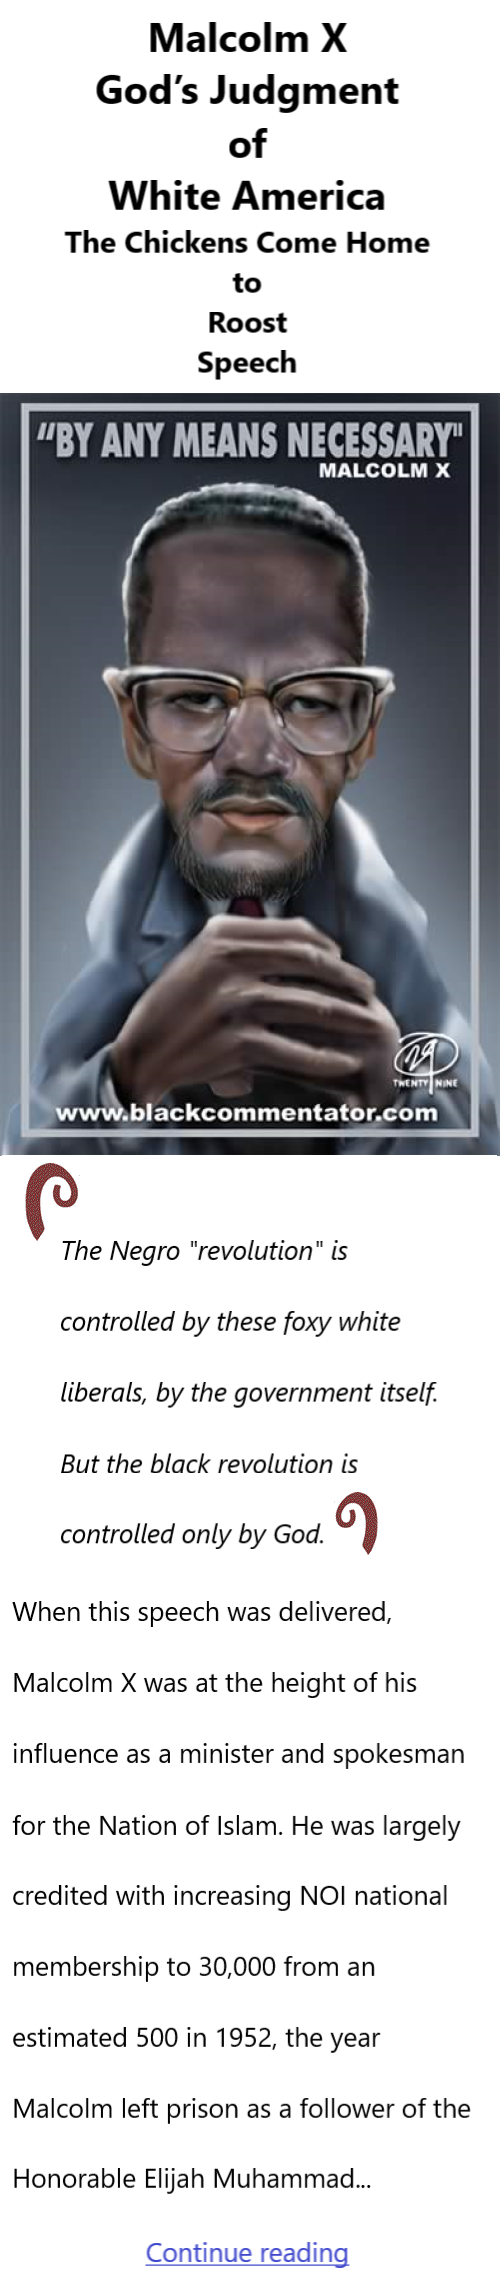 BlackCommentator.com May 16, 2024 - Issue 1001: Malcolm X - God’s Judgment of White America (The Chickens Come Home to Roost) Speech